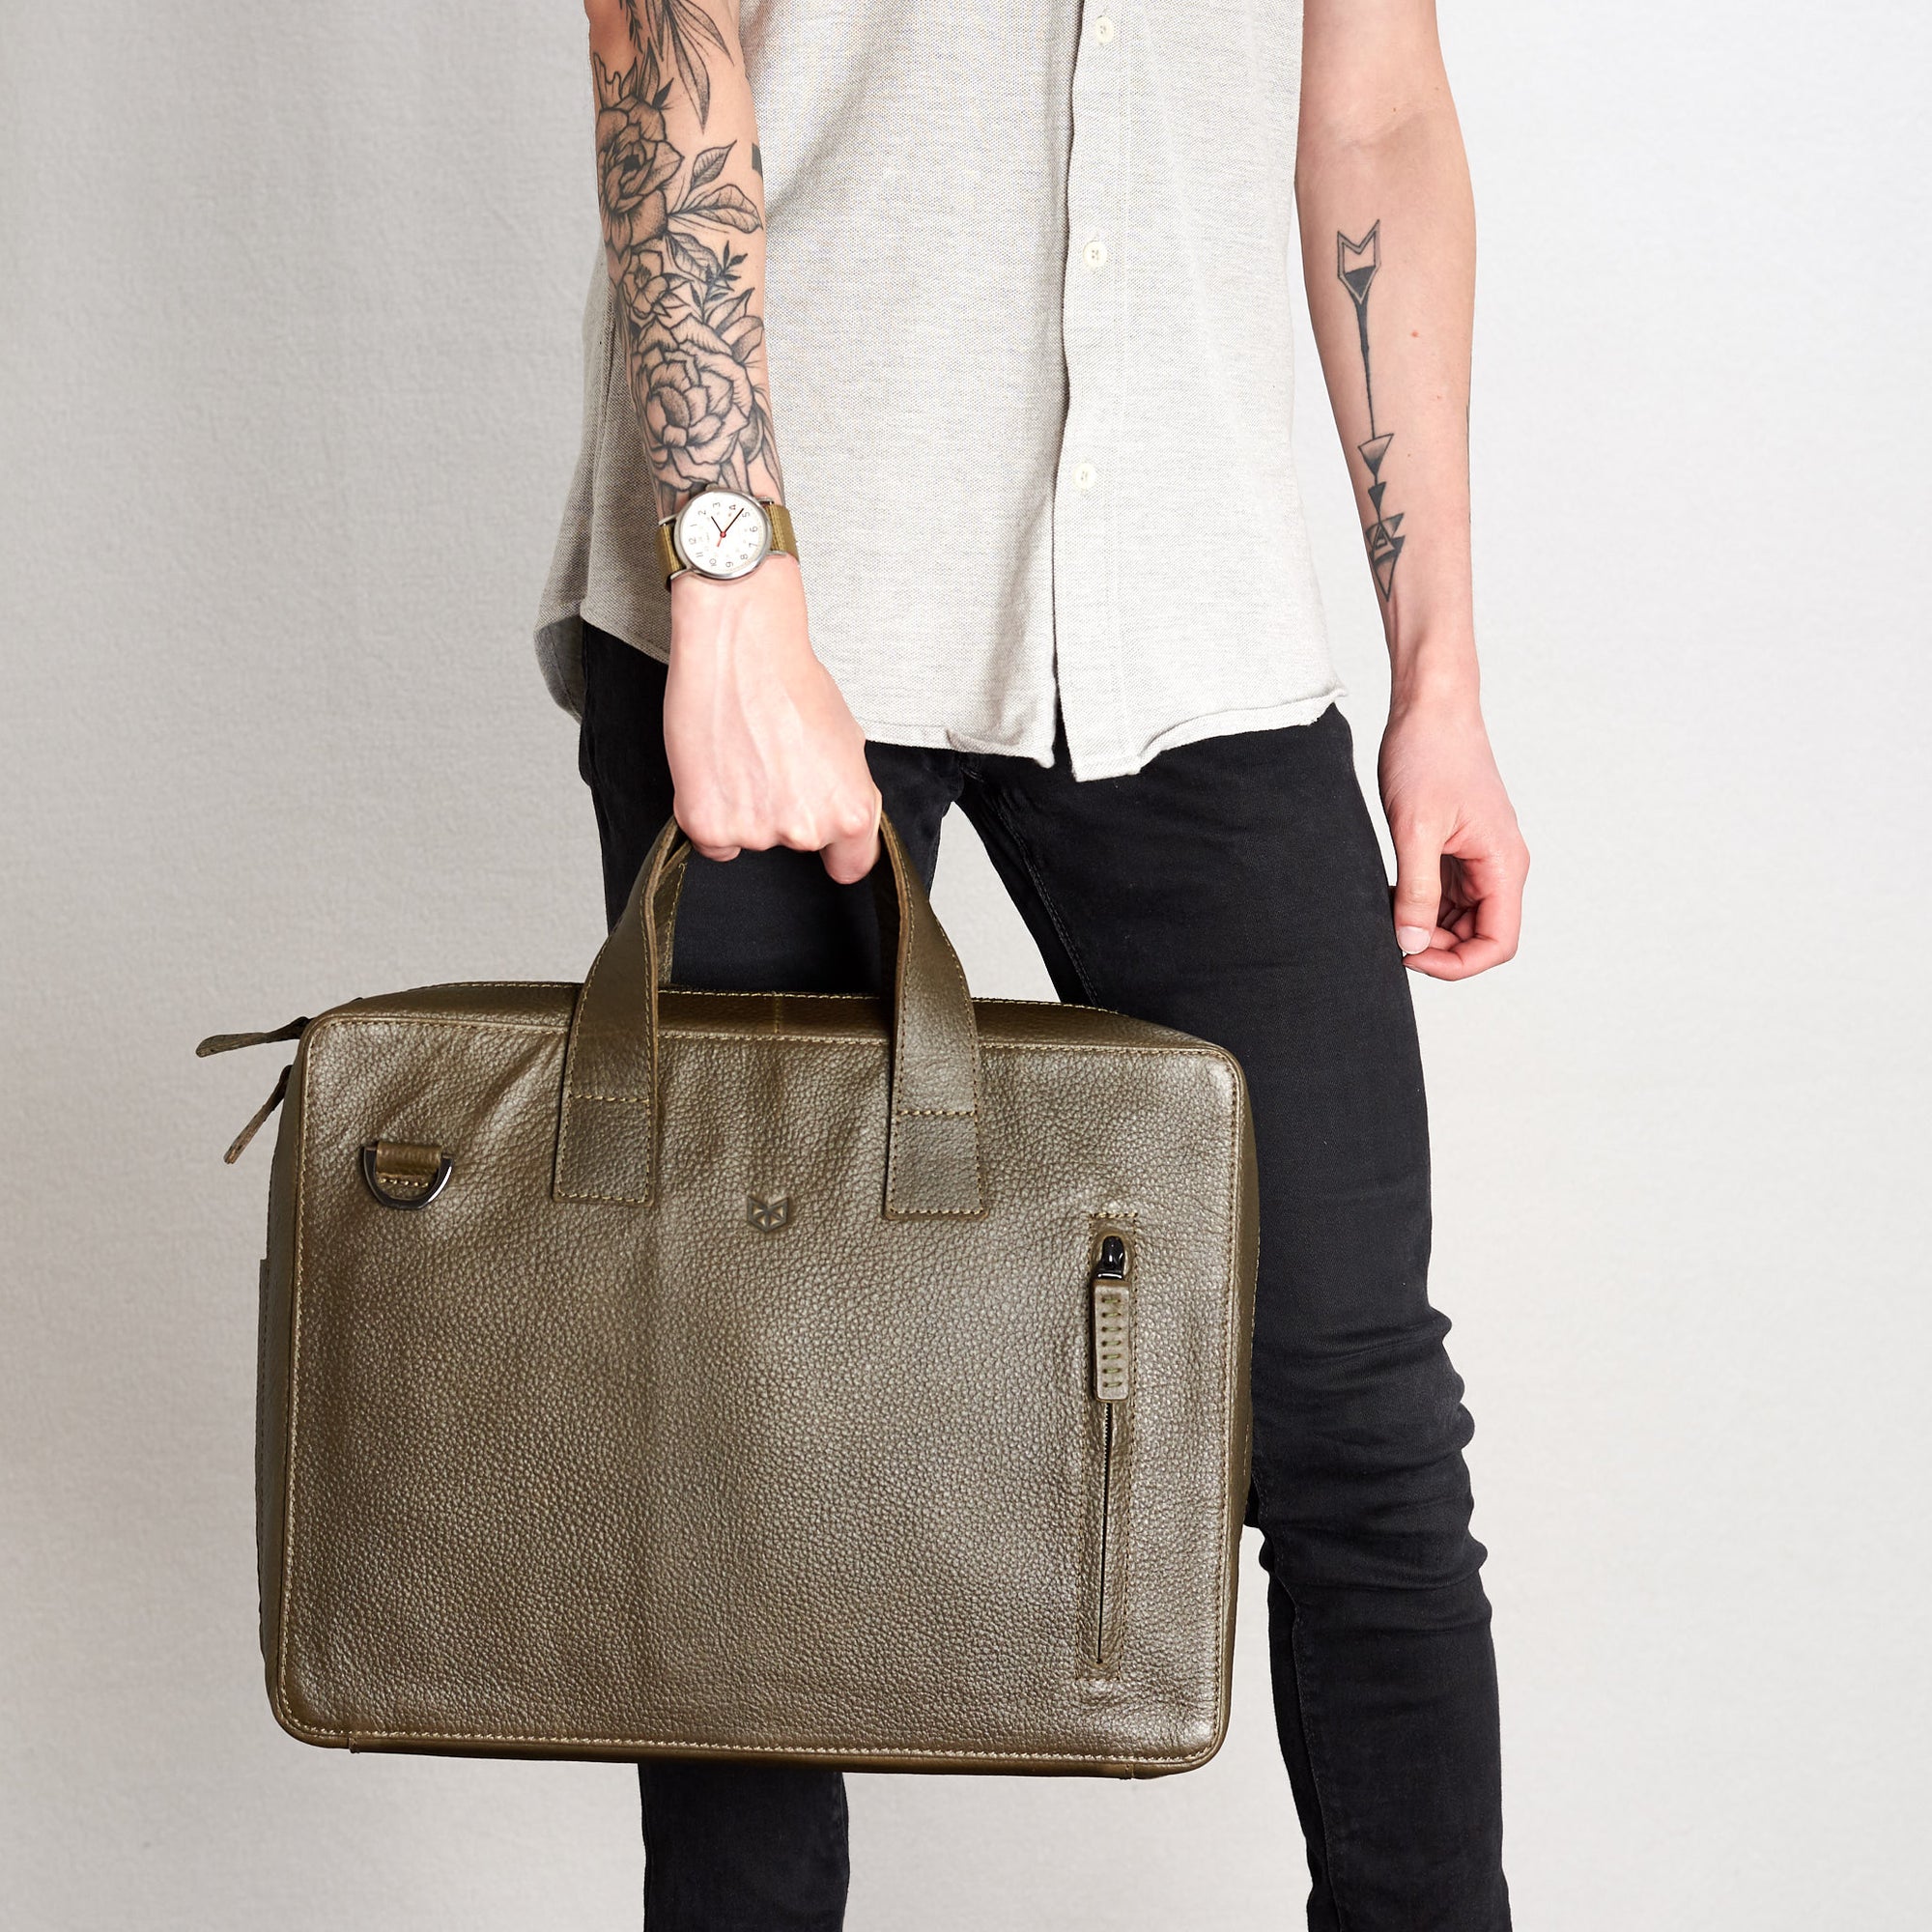 Green leather workbag for men. Unique office style bag